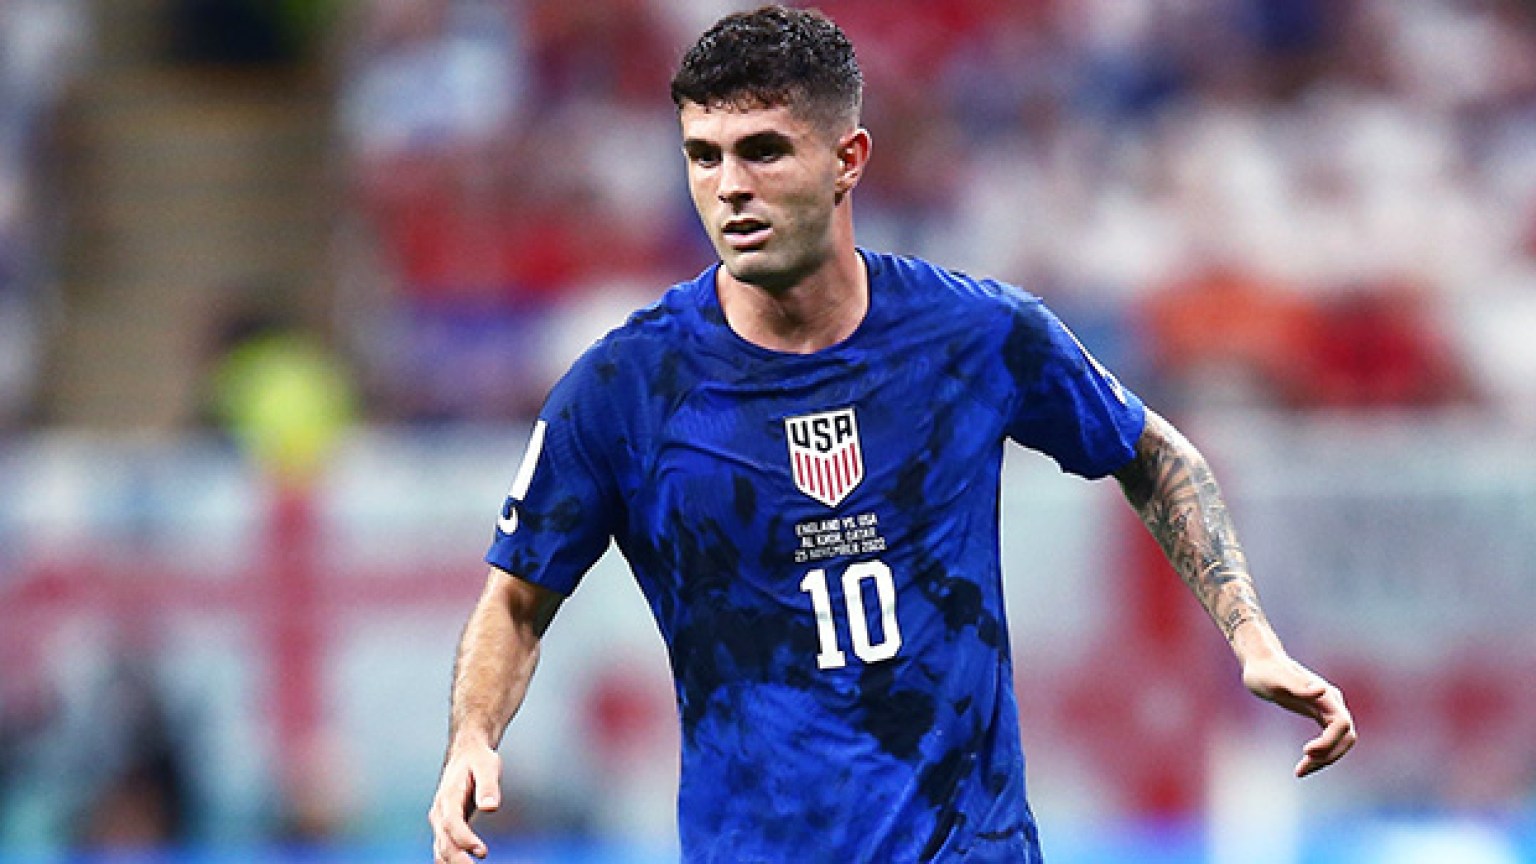 Christian Pulisics Sister Everything To Know About Devyn Pulisic